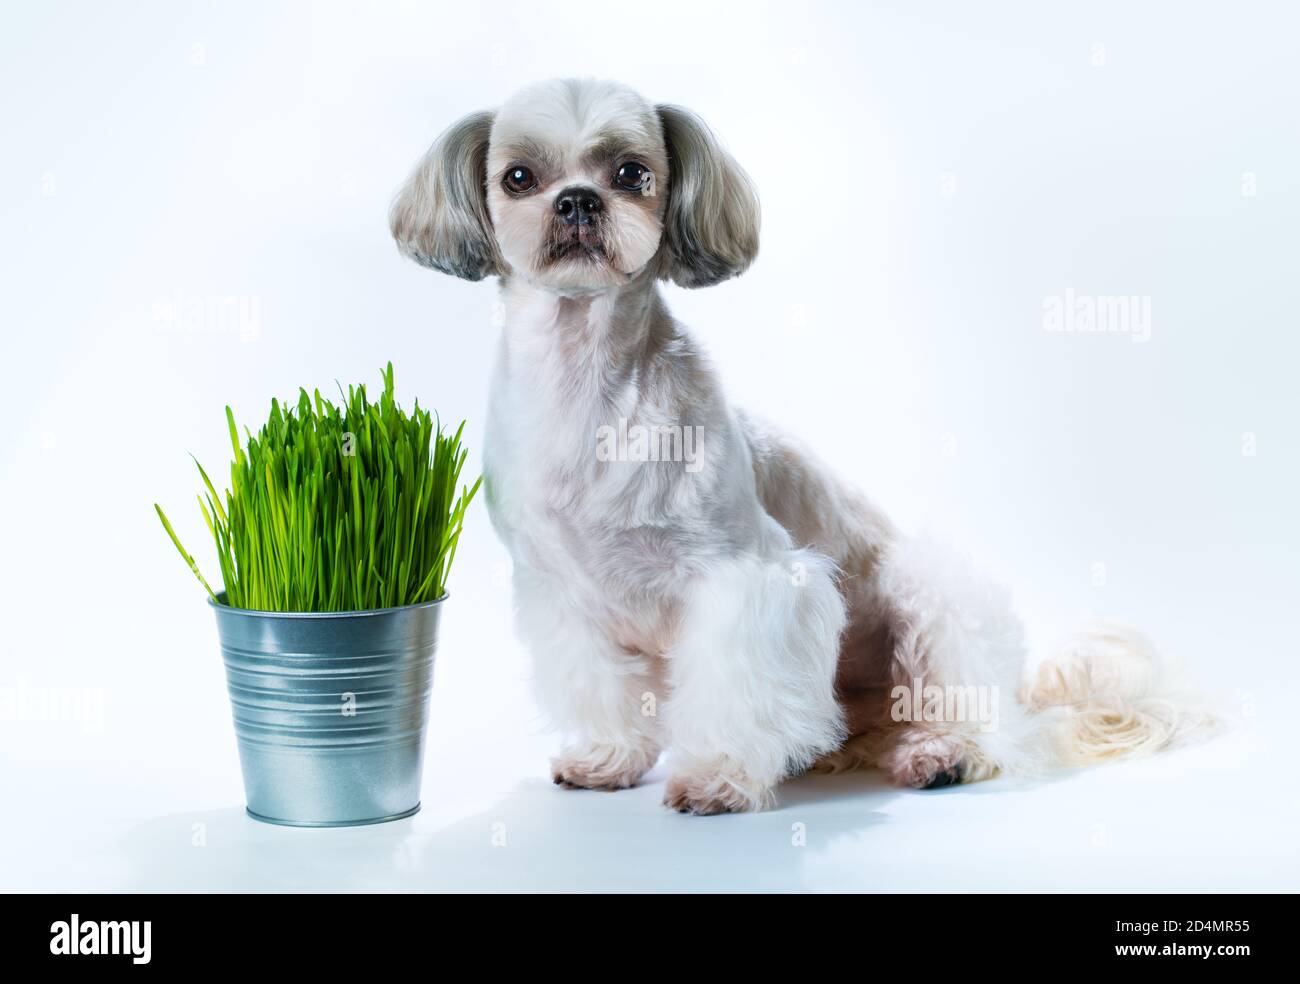 Shih tzu dog on white background and bucket with fresh growing grass Stock Photo